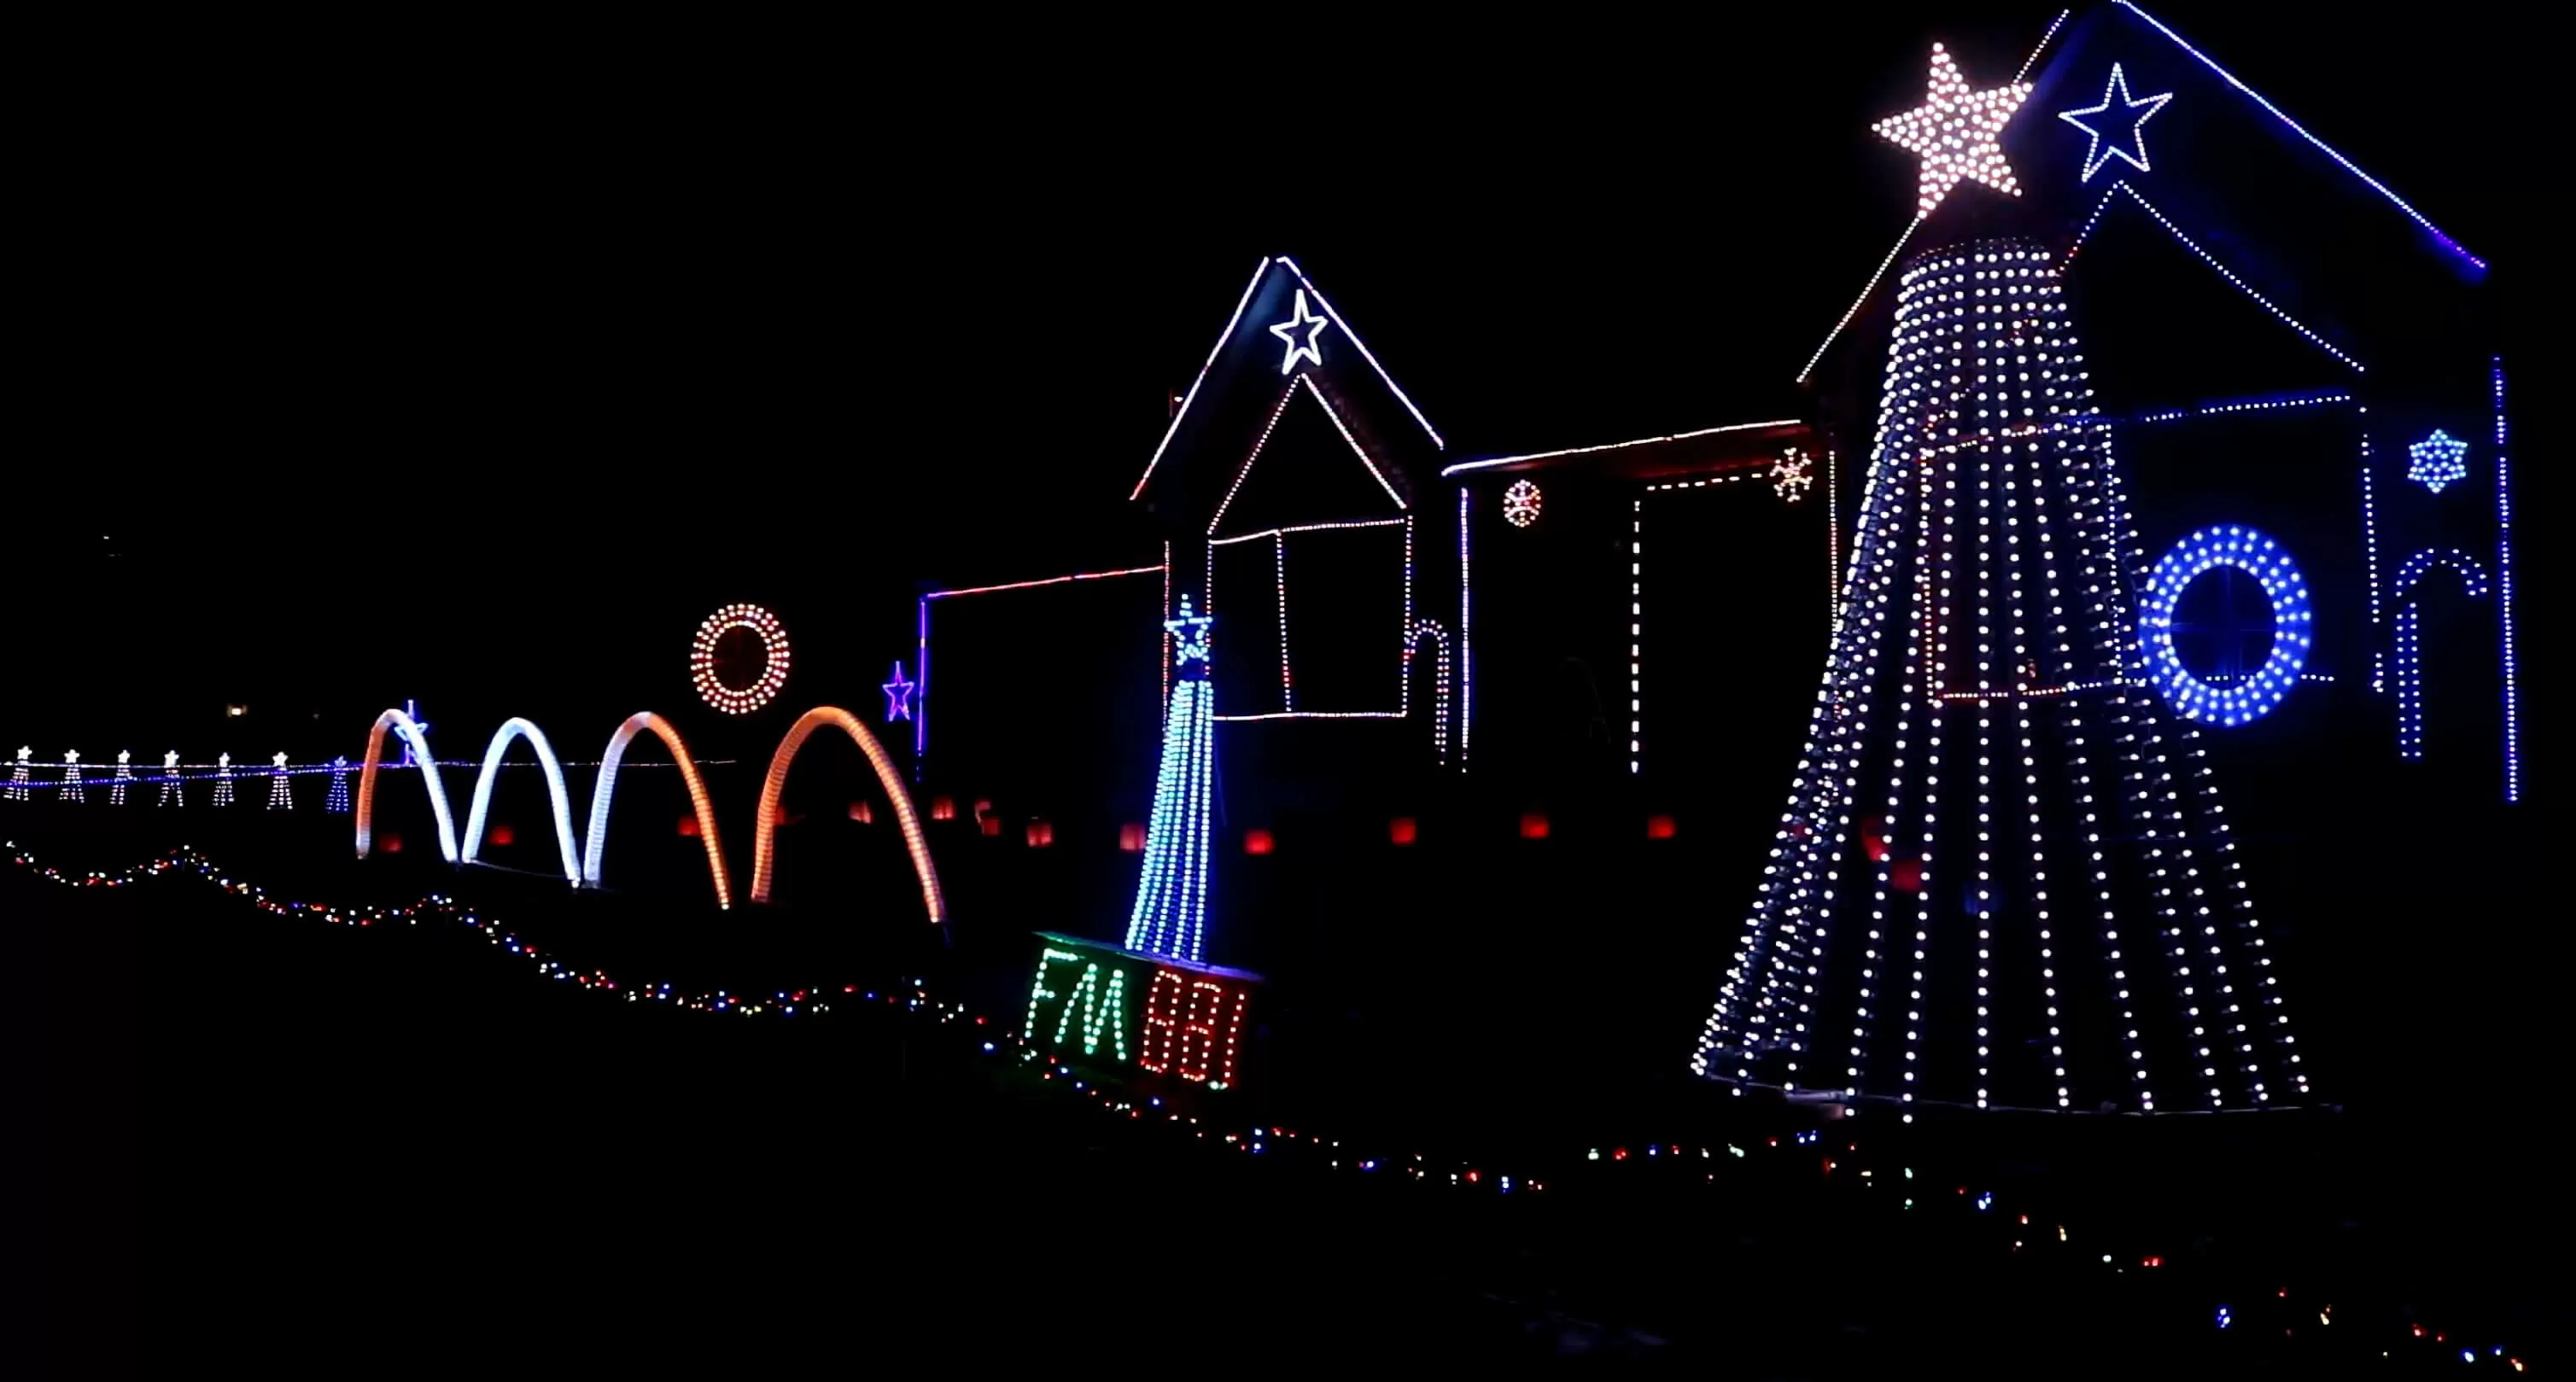 Ever Wondered How Those Computer-Controlled Christmas Light Displays Work?  | TechSpot